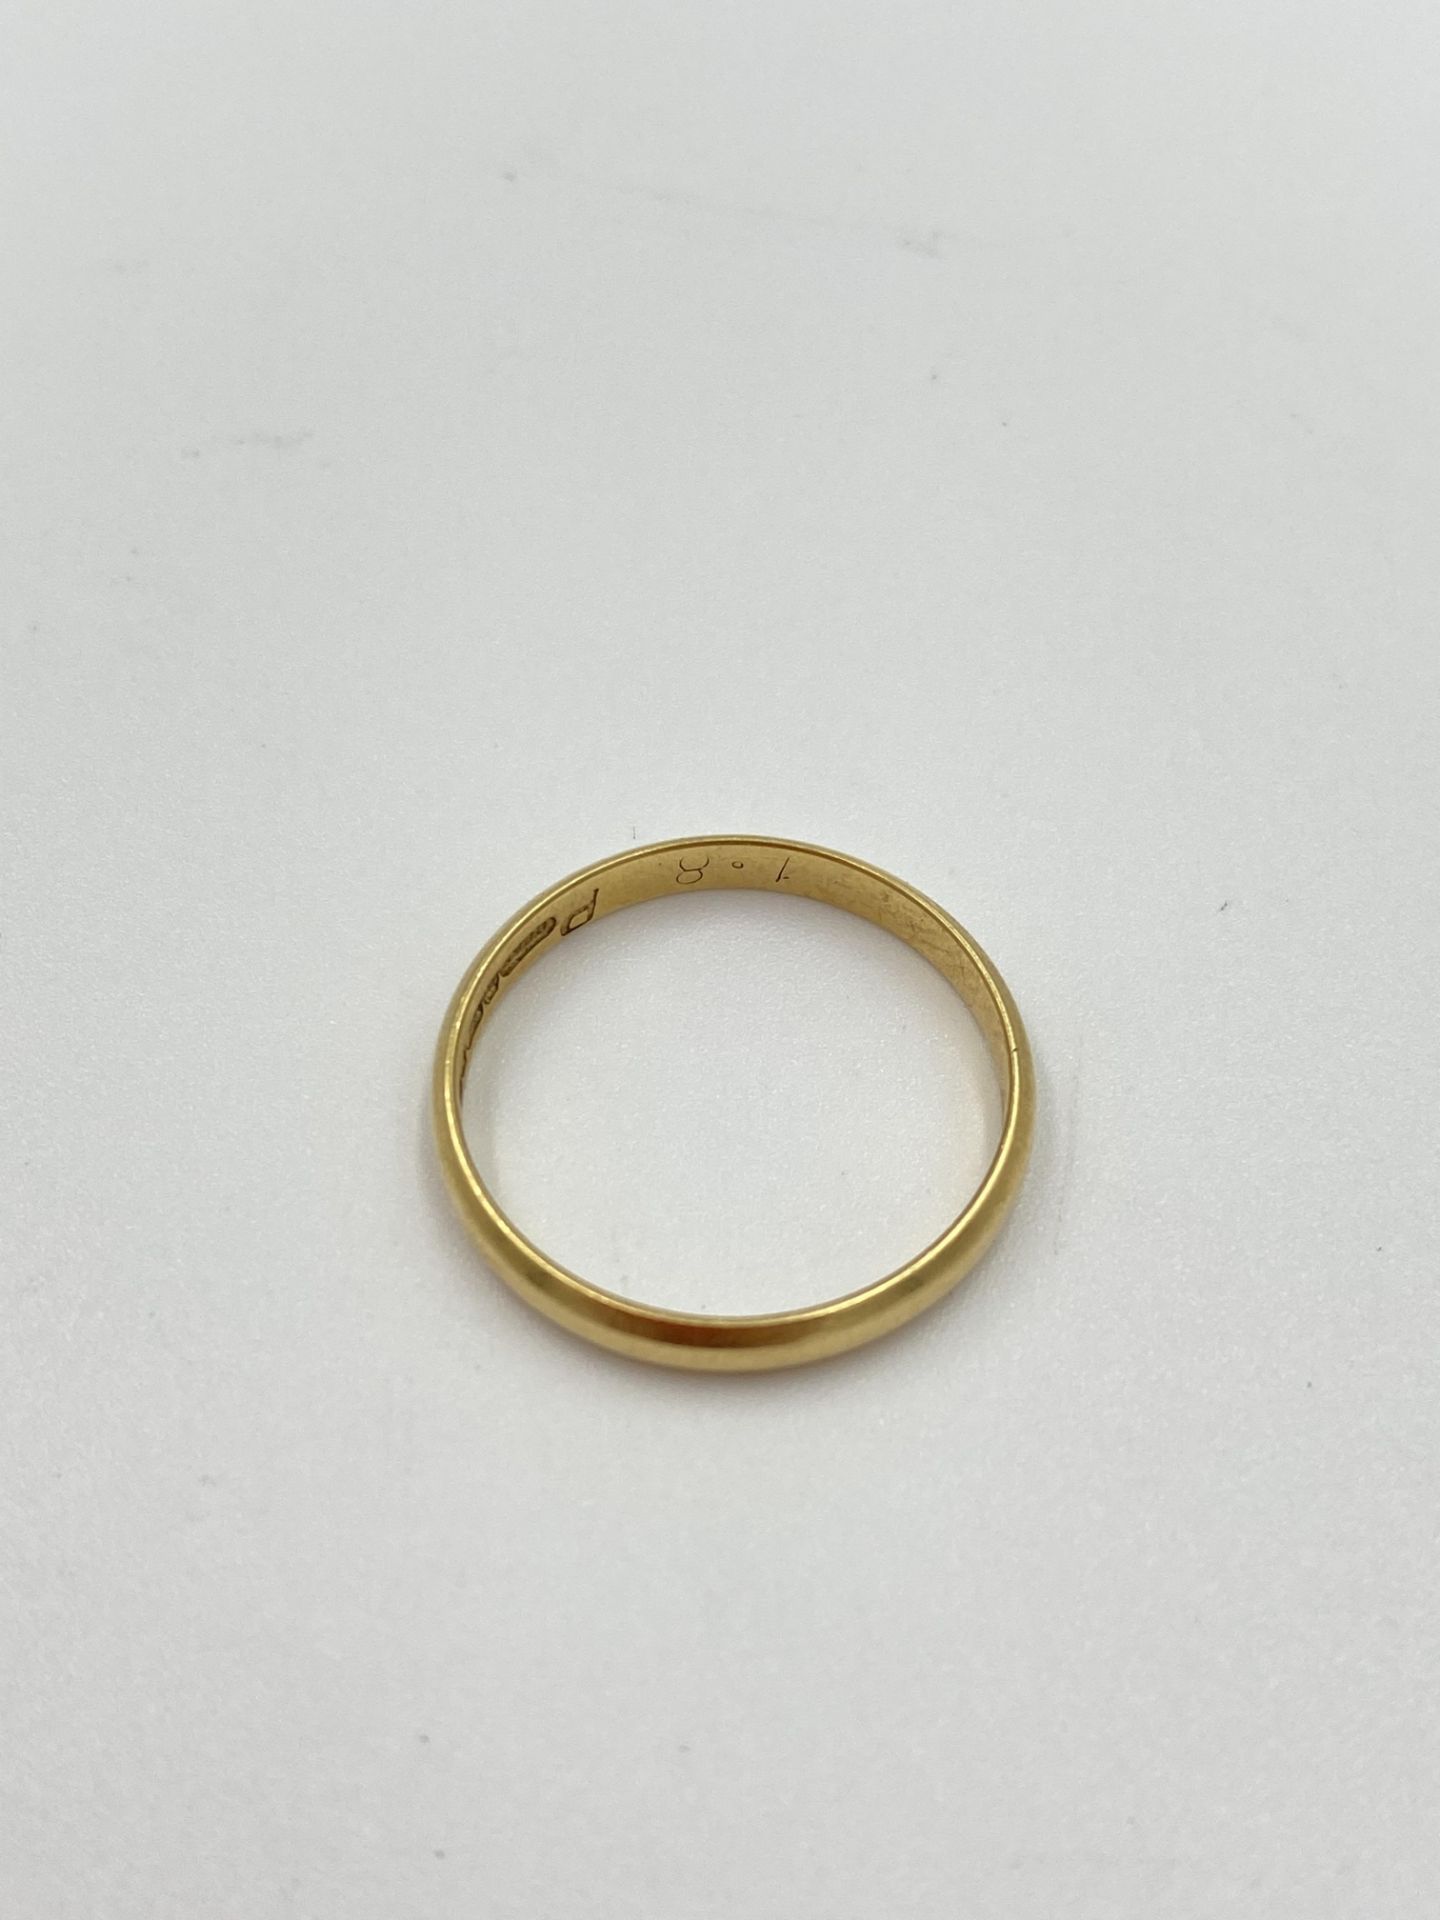 18ct gold band - Image 3 of 3